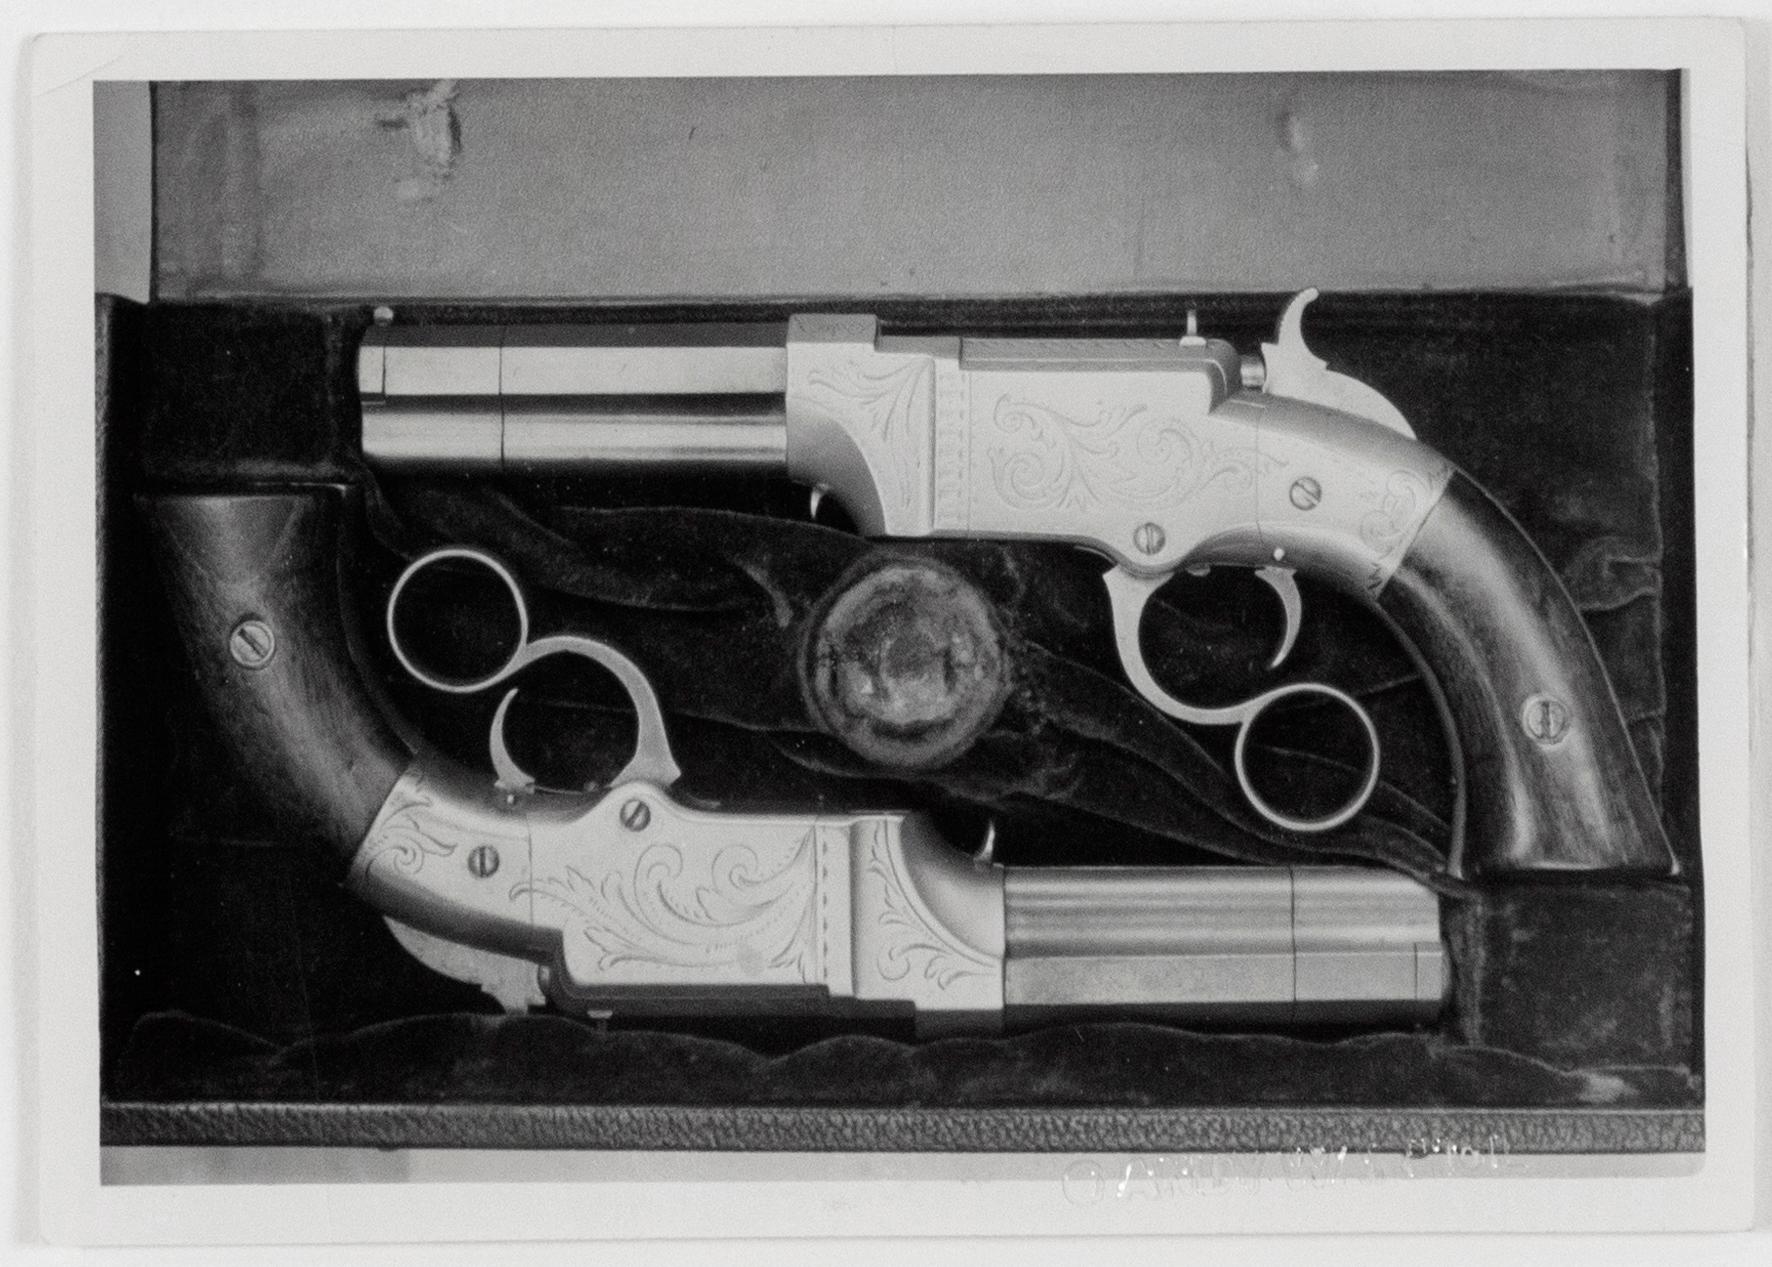 Pocket Pistols - Photograph by Andy Warhol